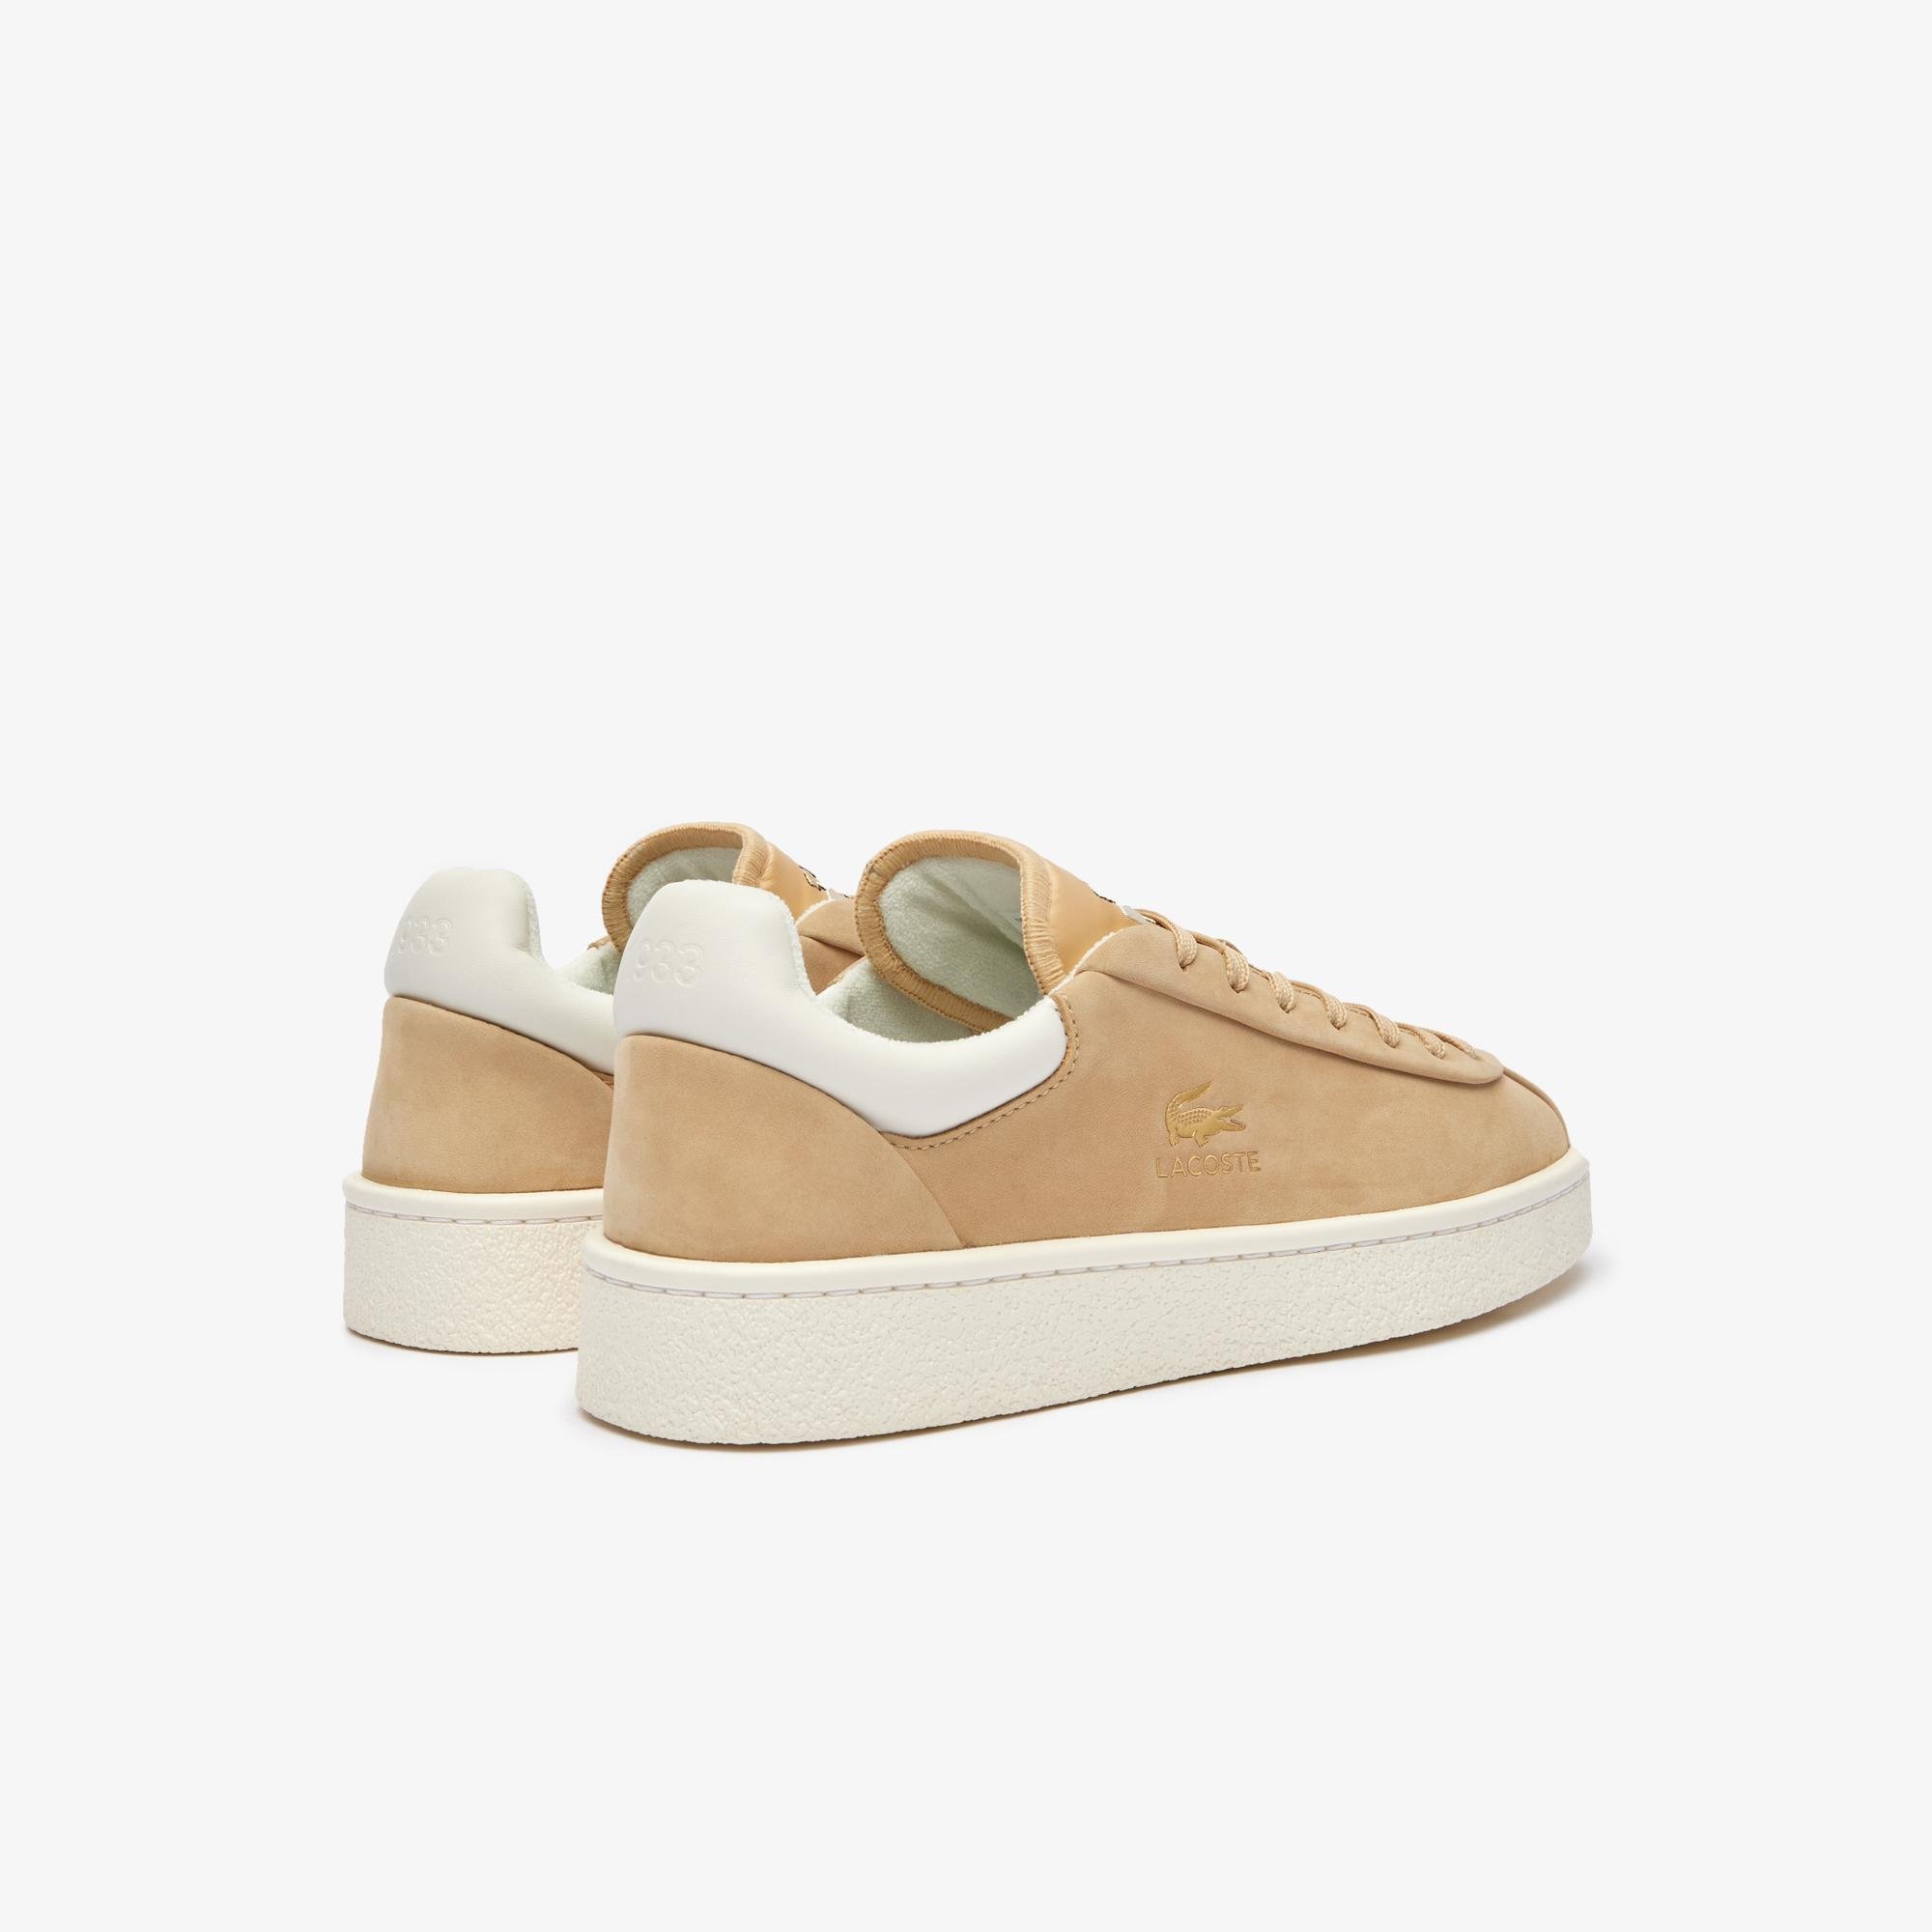 Lacoste Women's Baseshot Premium Leather Trainers